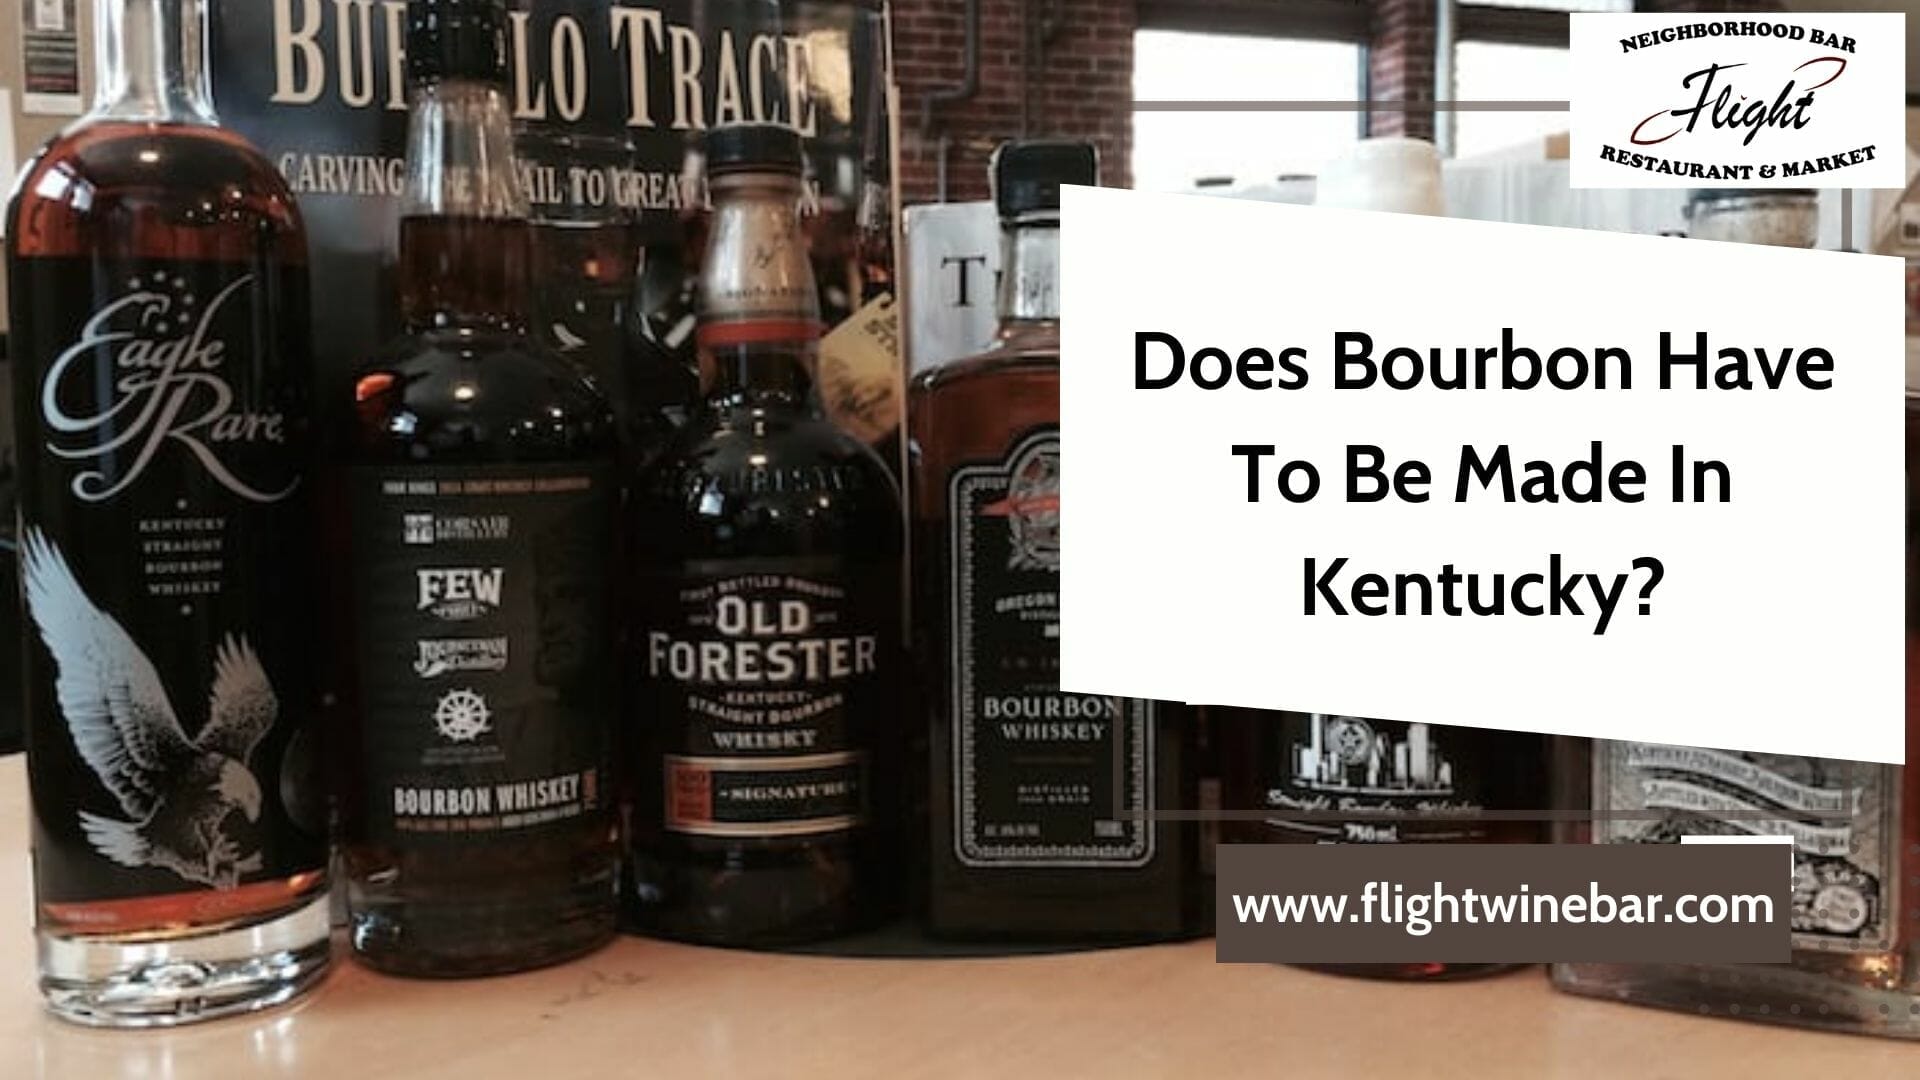 Does Bourbon Have To Be Made In Kentucky